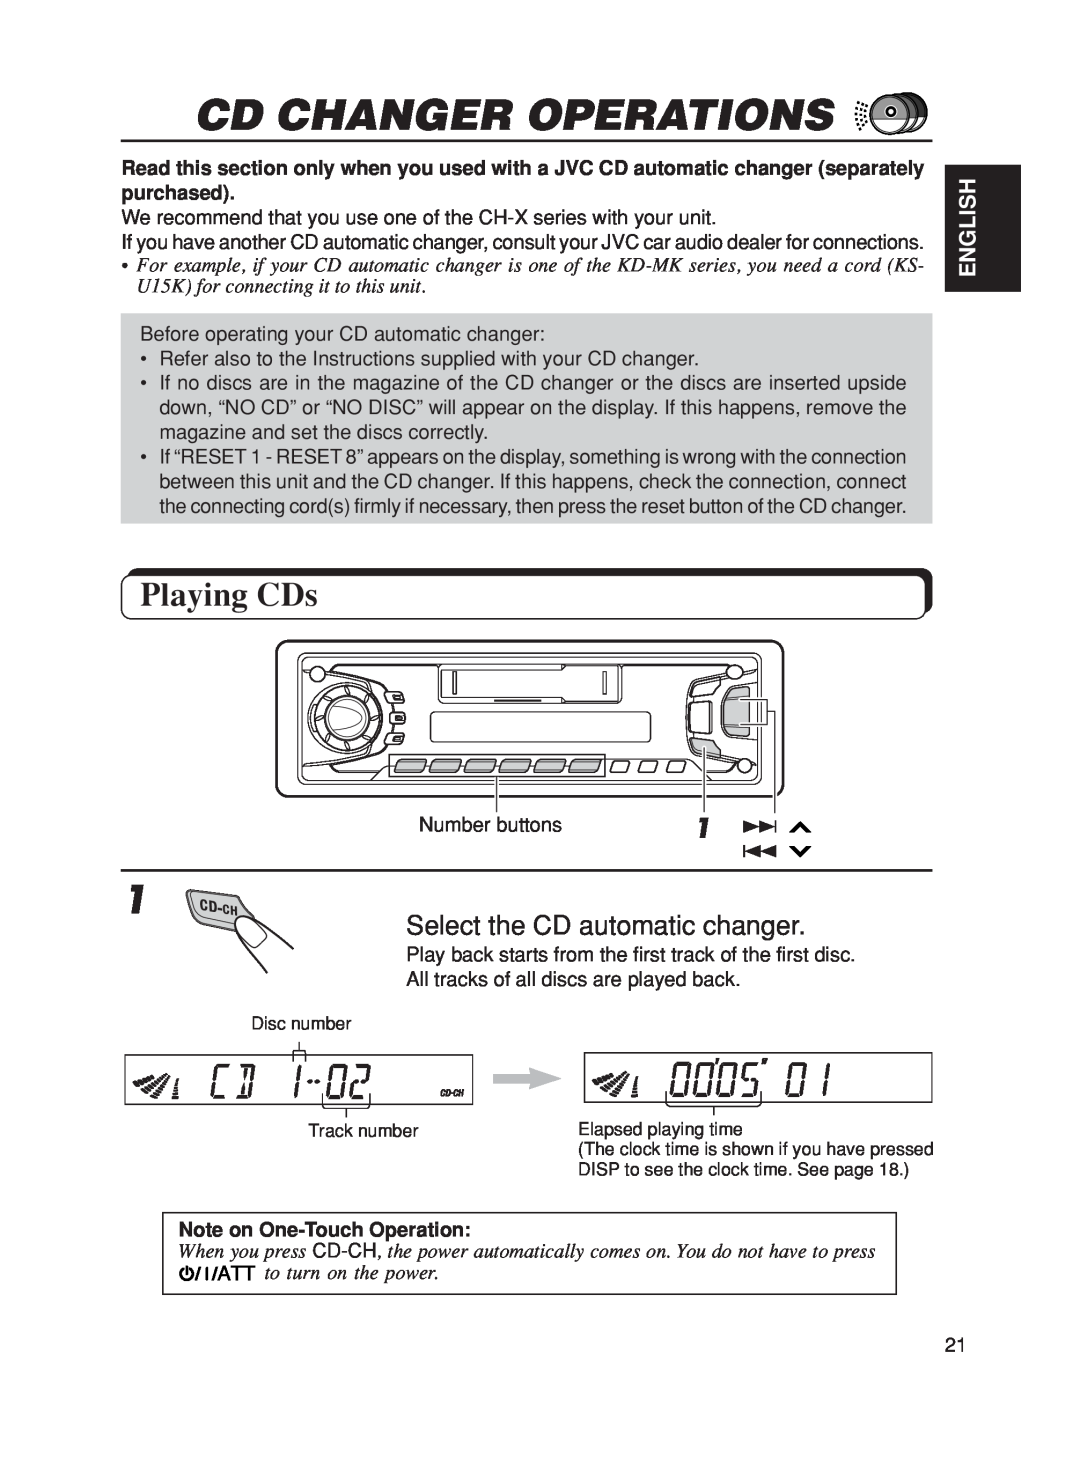 JVC KS-FX270 Cd Changer Operations, Playing CDs, Select the CD automatic changer, English, Note on One-TouchOperation 